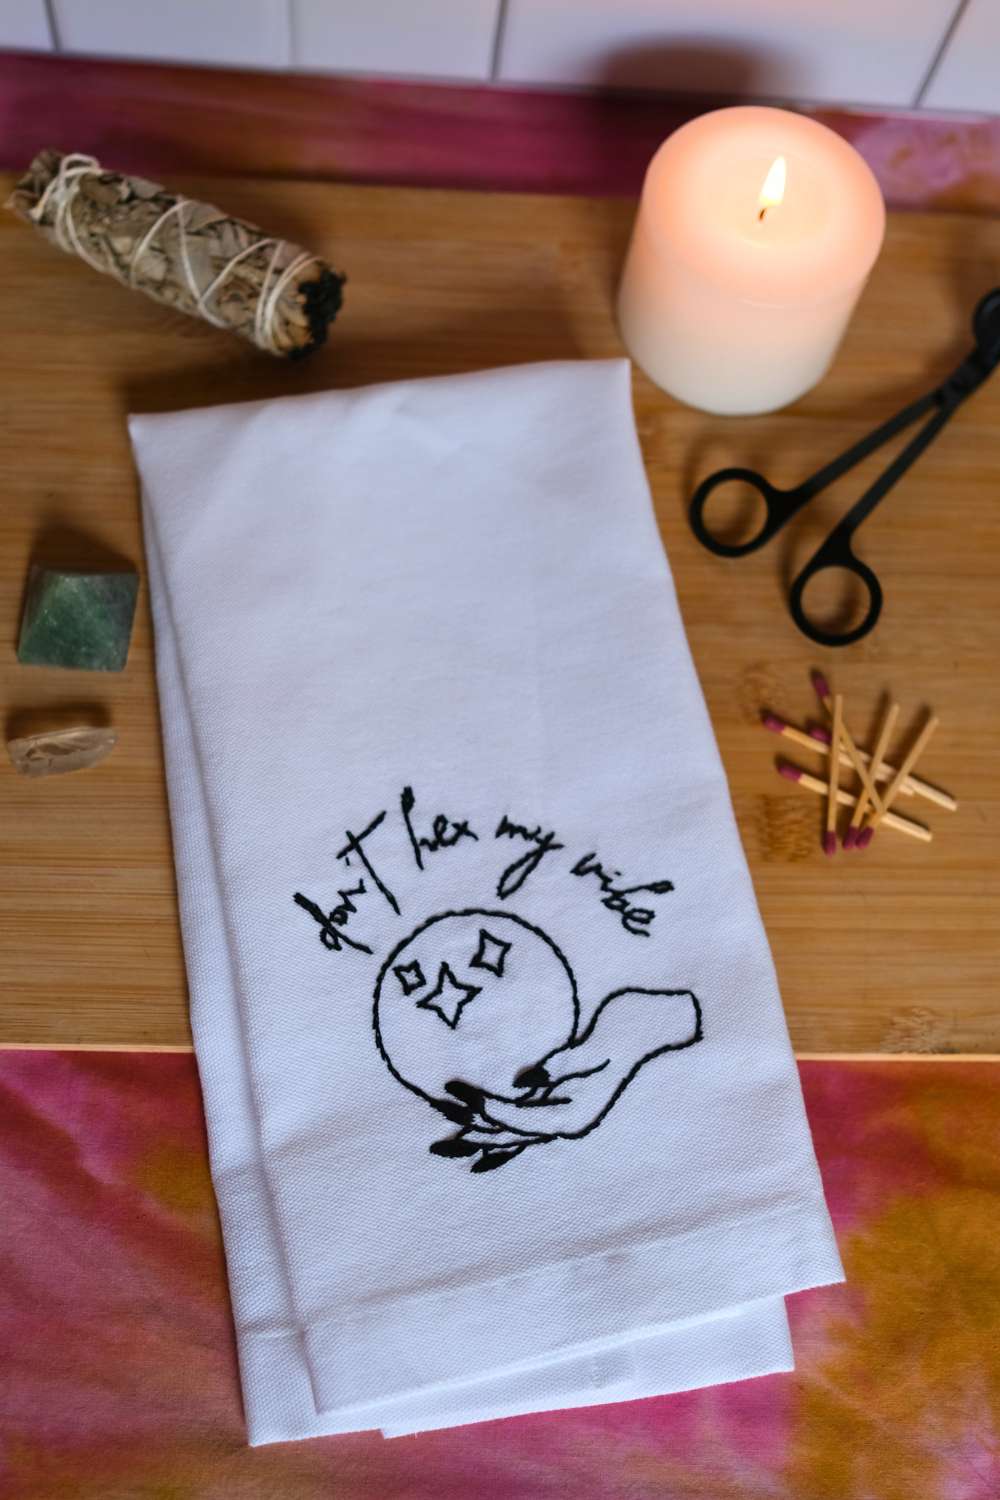 White tea towel with black DIY Halloween hand embroidery reads "don't hex my vibe" in cursive font and shows a witch hand holding a crystal ball. Towel sits atop a wood cutting board surrounded by sage, crystals, lit white candle, black wick trimmer, and matches.